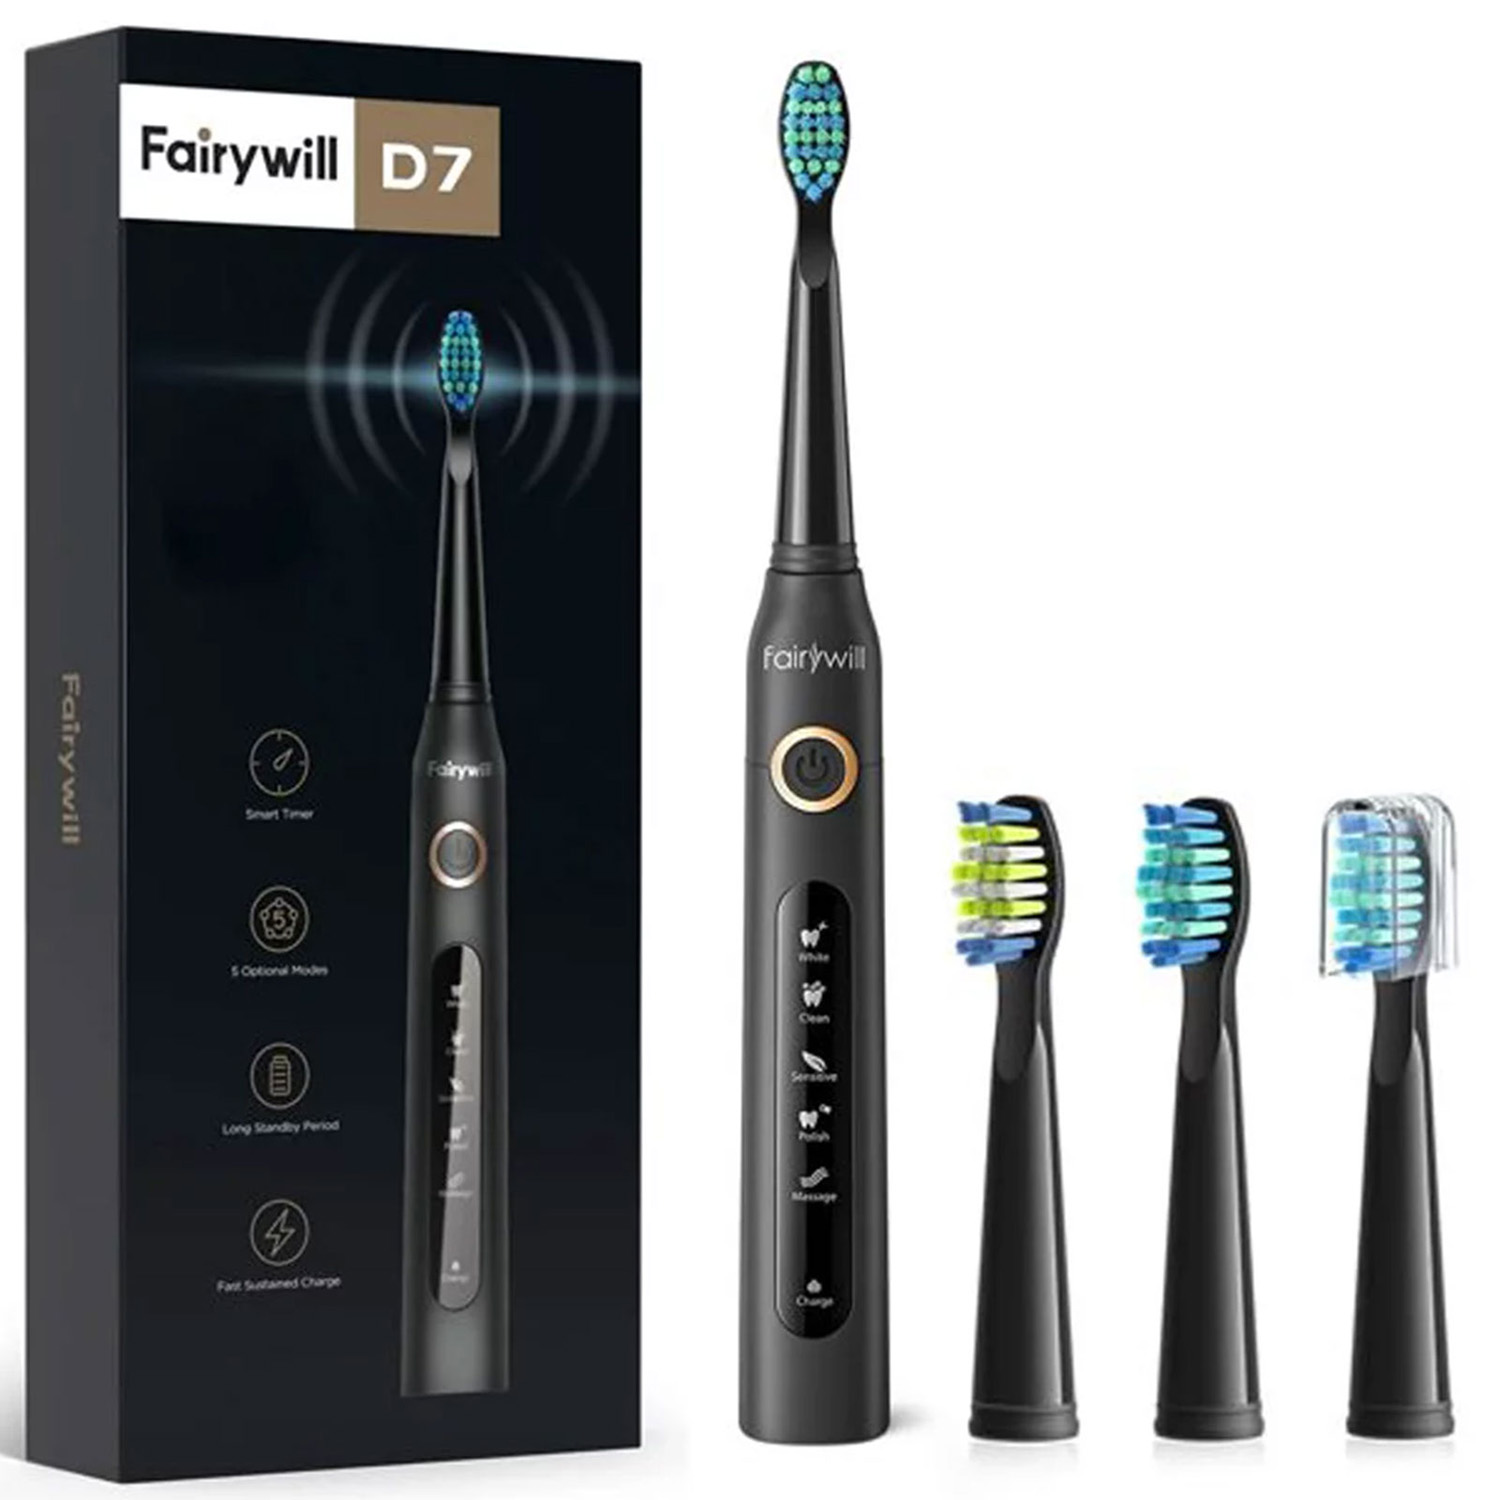 Fairywill Sonic Electric Toothbrush, Rechargeable Power Toothrush with 4 Brush Heads, 5 Modes and 2 Minutes Build in Smart Timer, Black - image 1 of 9